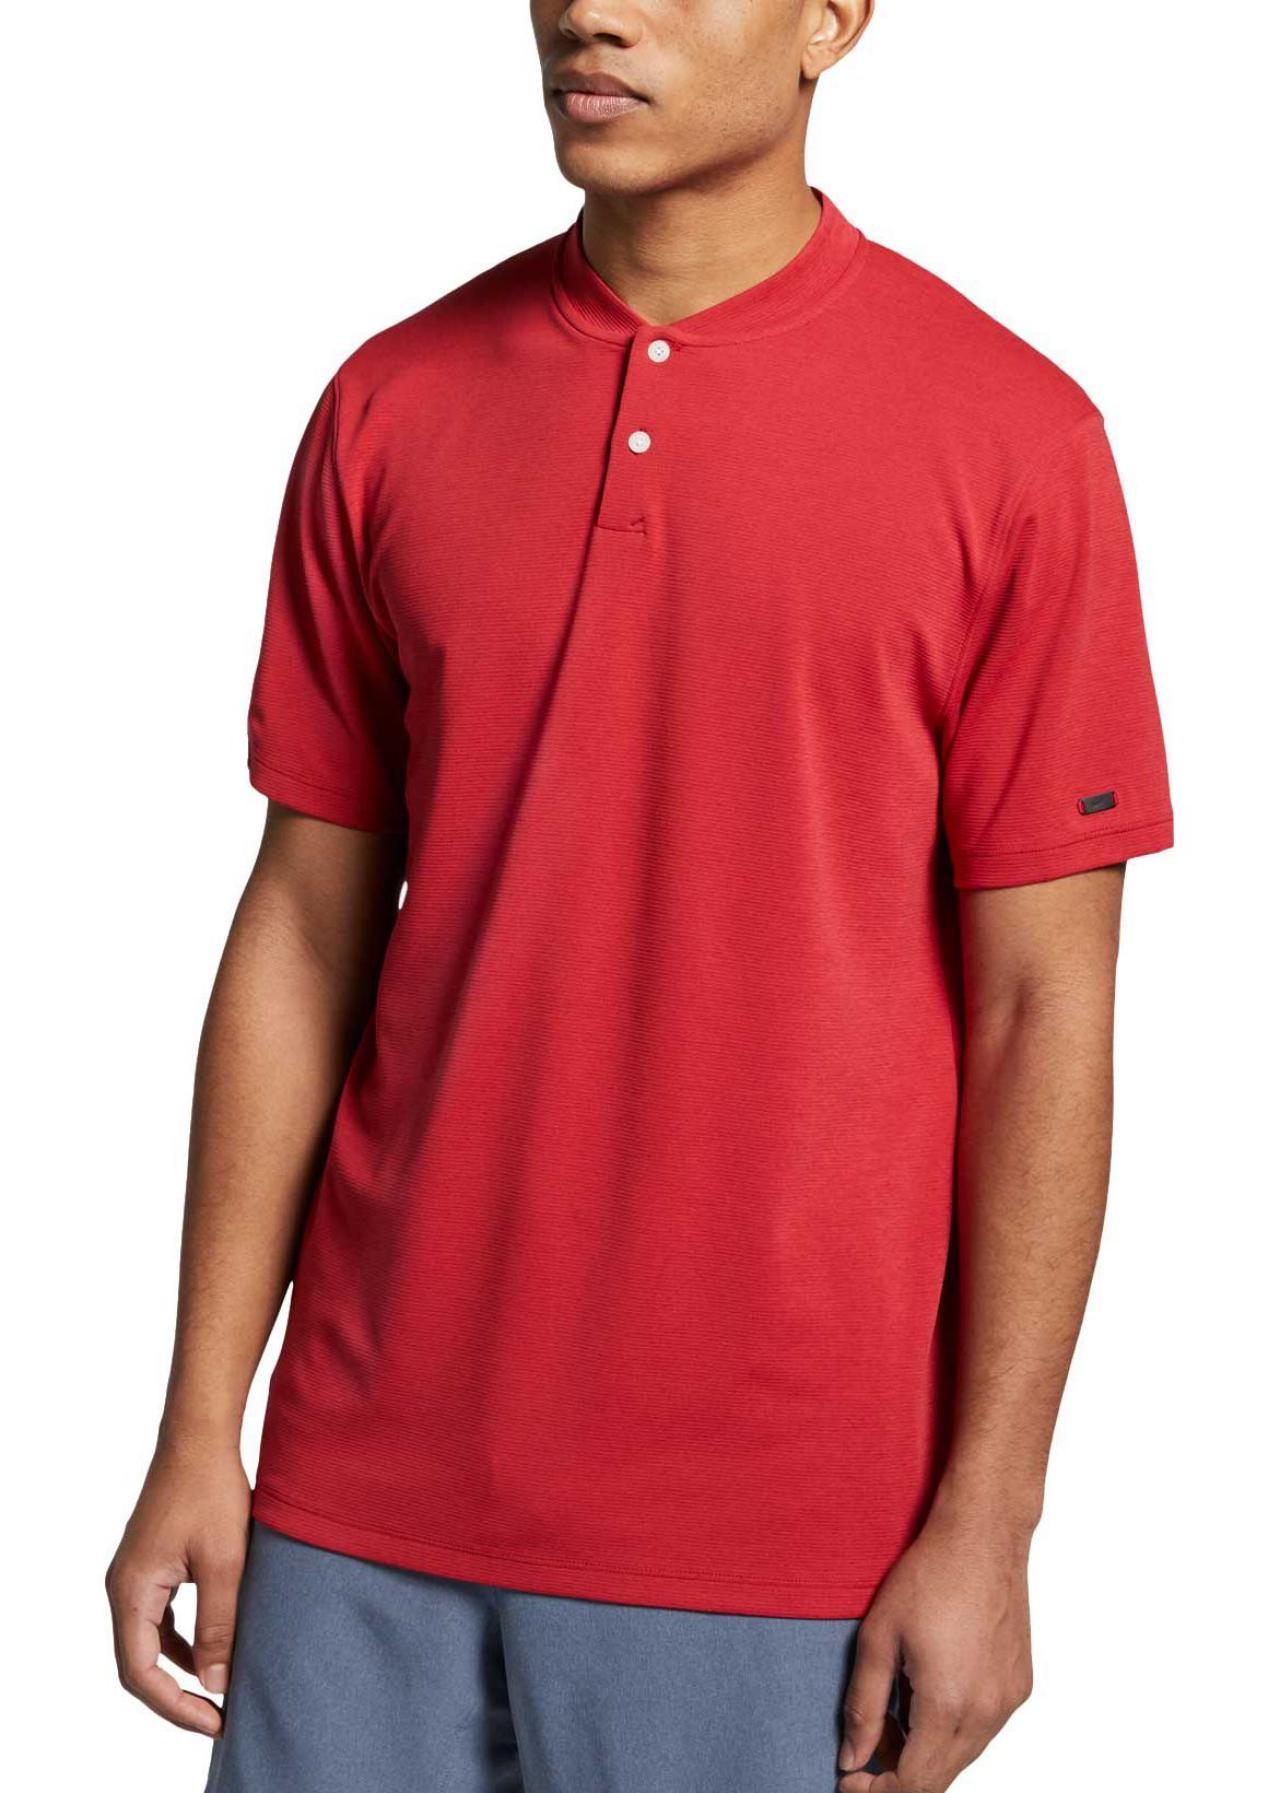 The argument for Tiger Woods' mock neck shirt, Golf Equipment: Clubs,  Balls, Bags